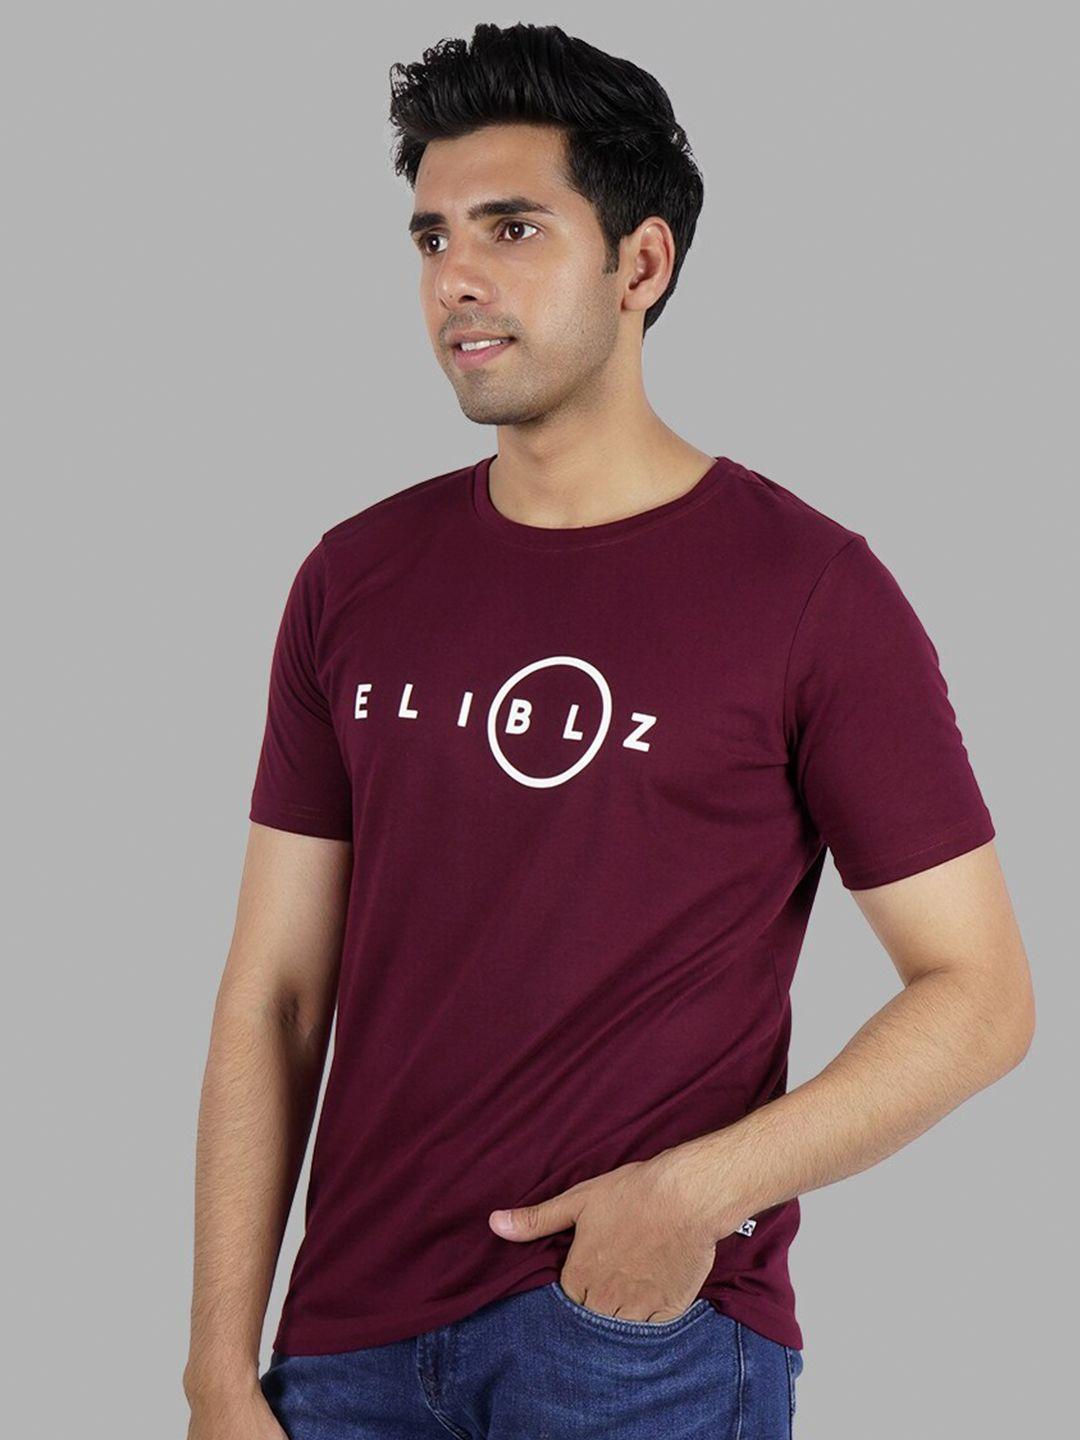 elibolz typography printed round neck regular fit cotton casual t-shirt